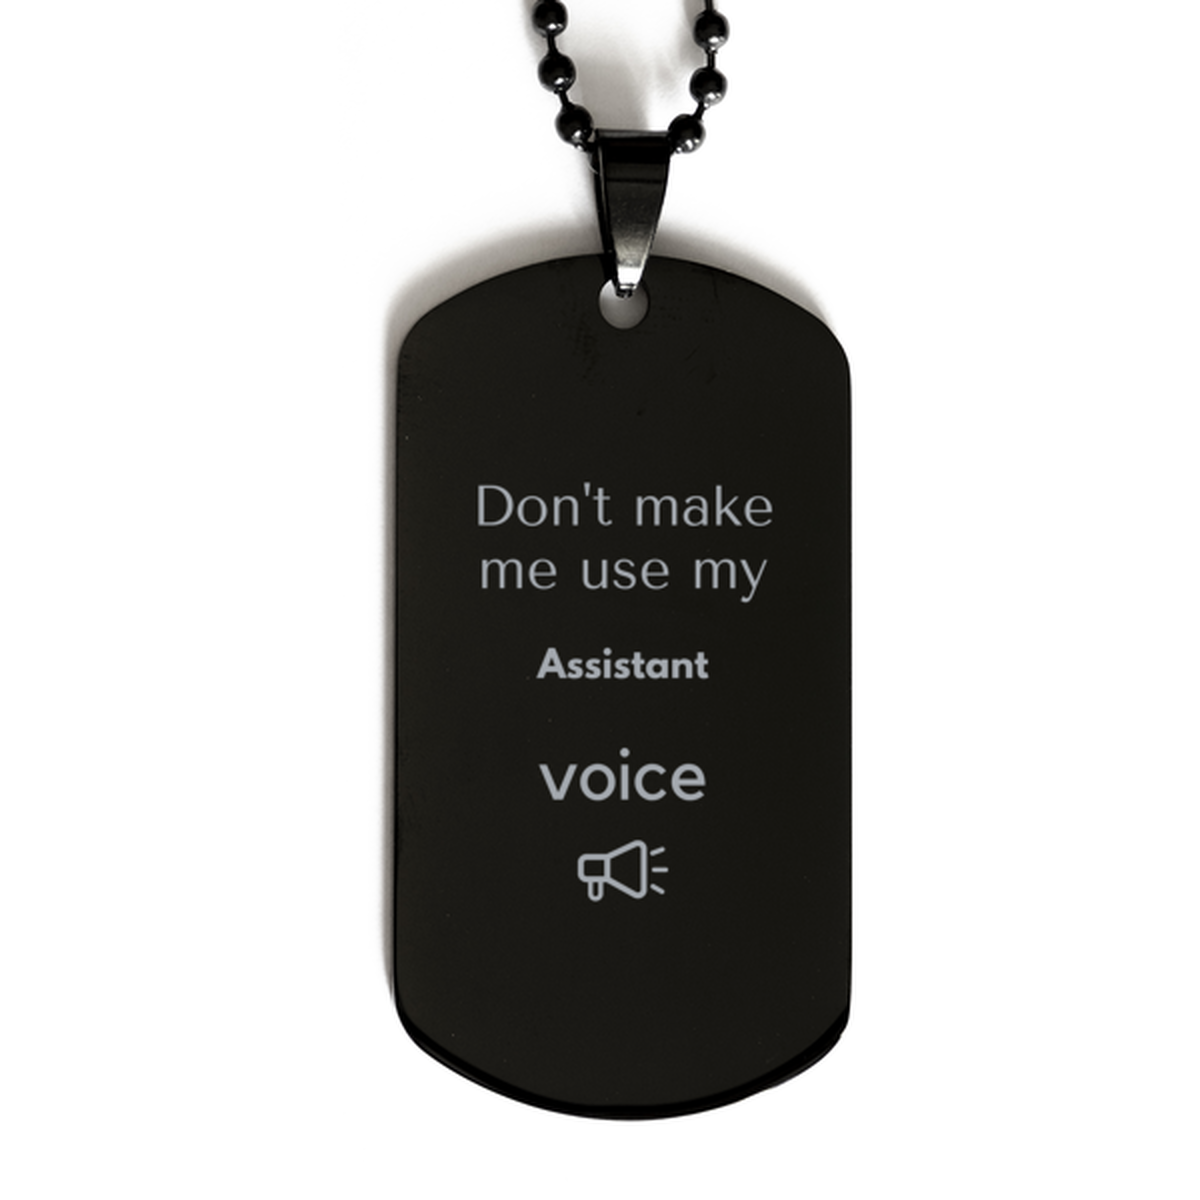 Don't make me use my Assistant voice, Sarcasm Assistant Gifts, Christmas Assistant Black Dog Tag Birthday Unique Gifts For Assistant Coworkers, Men, Women, Colleague, Friends